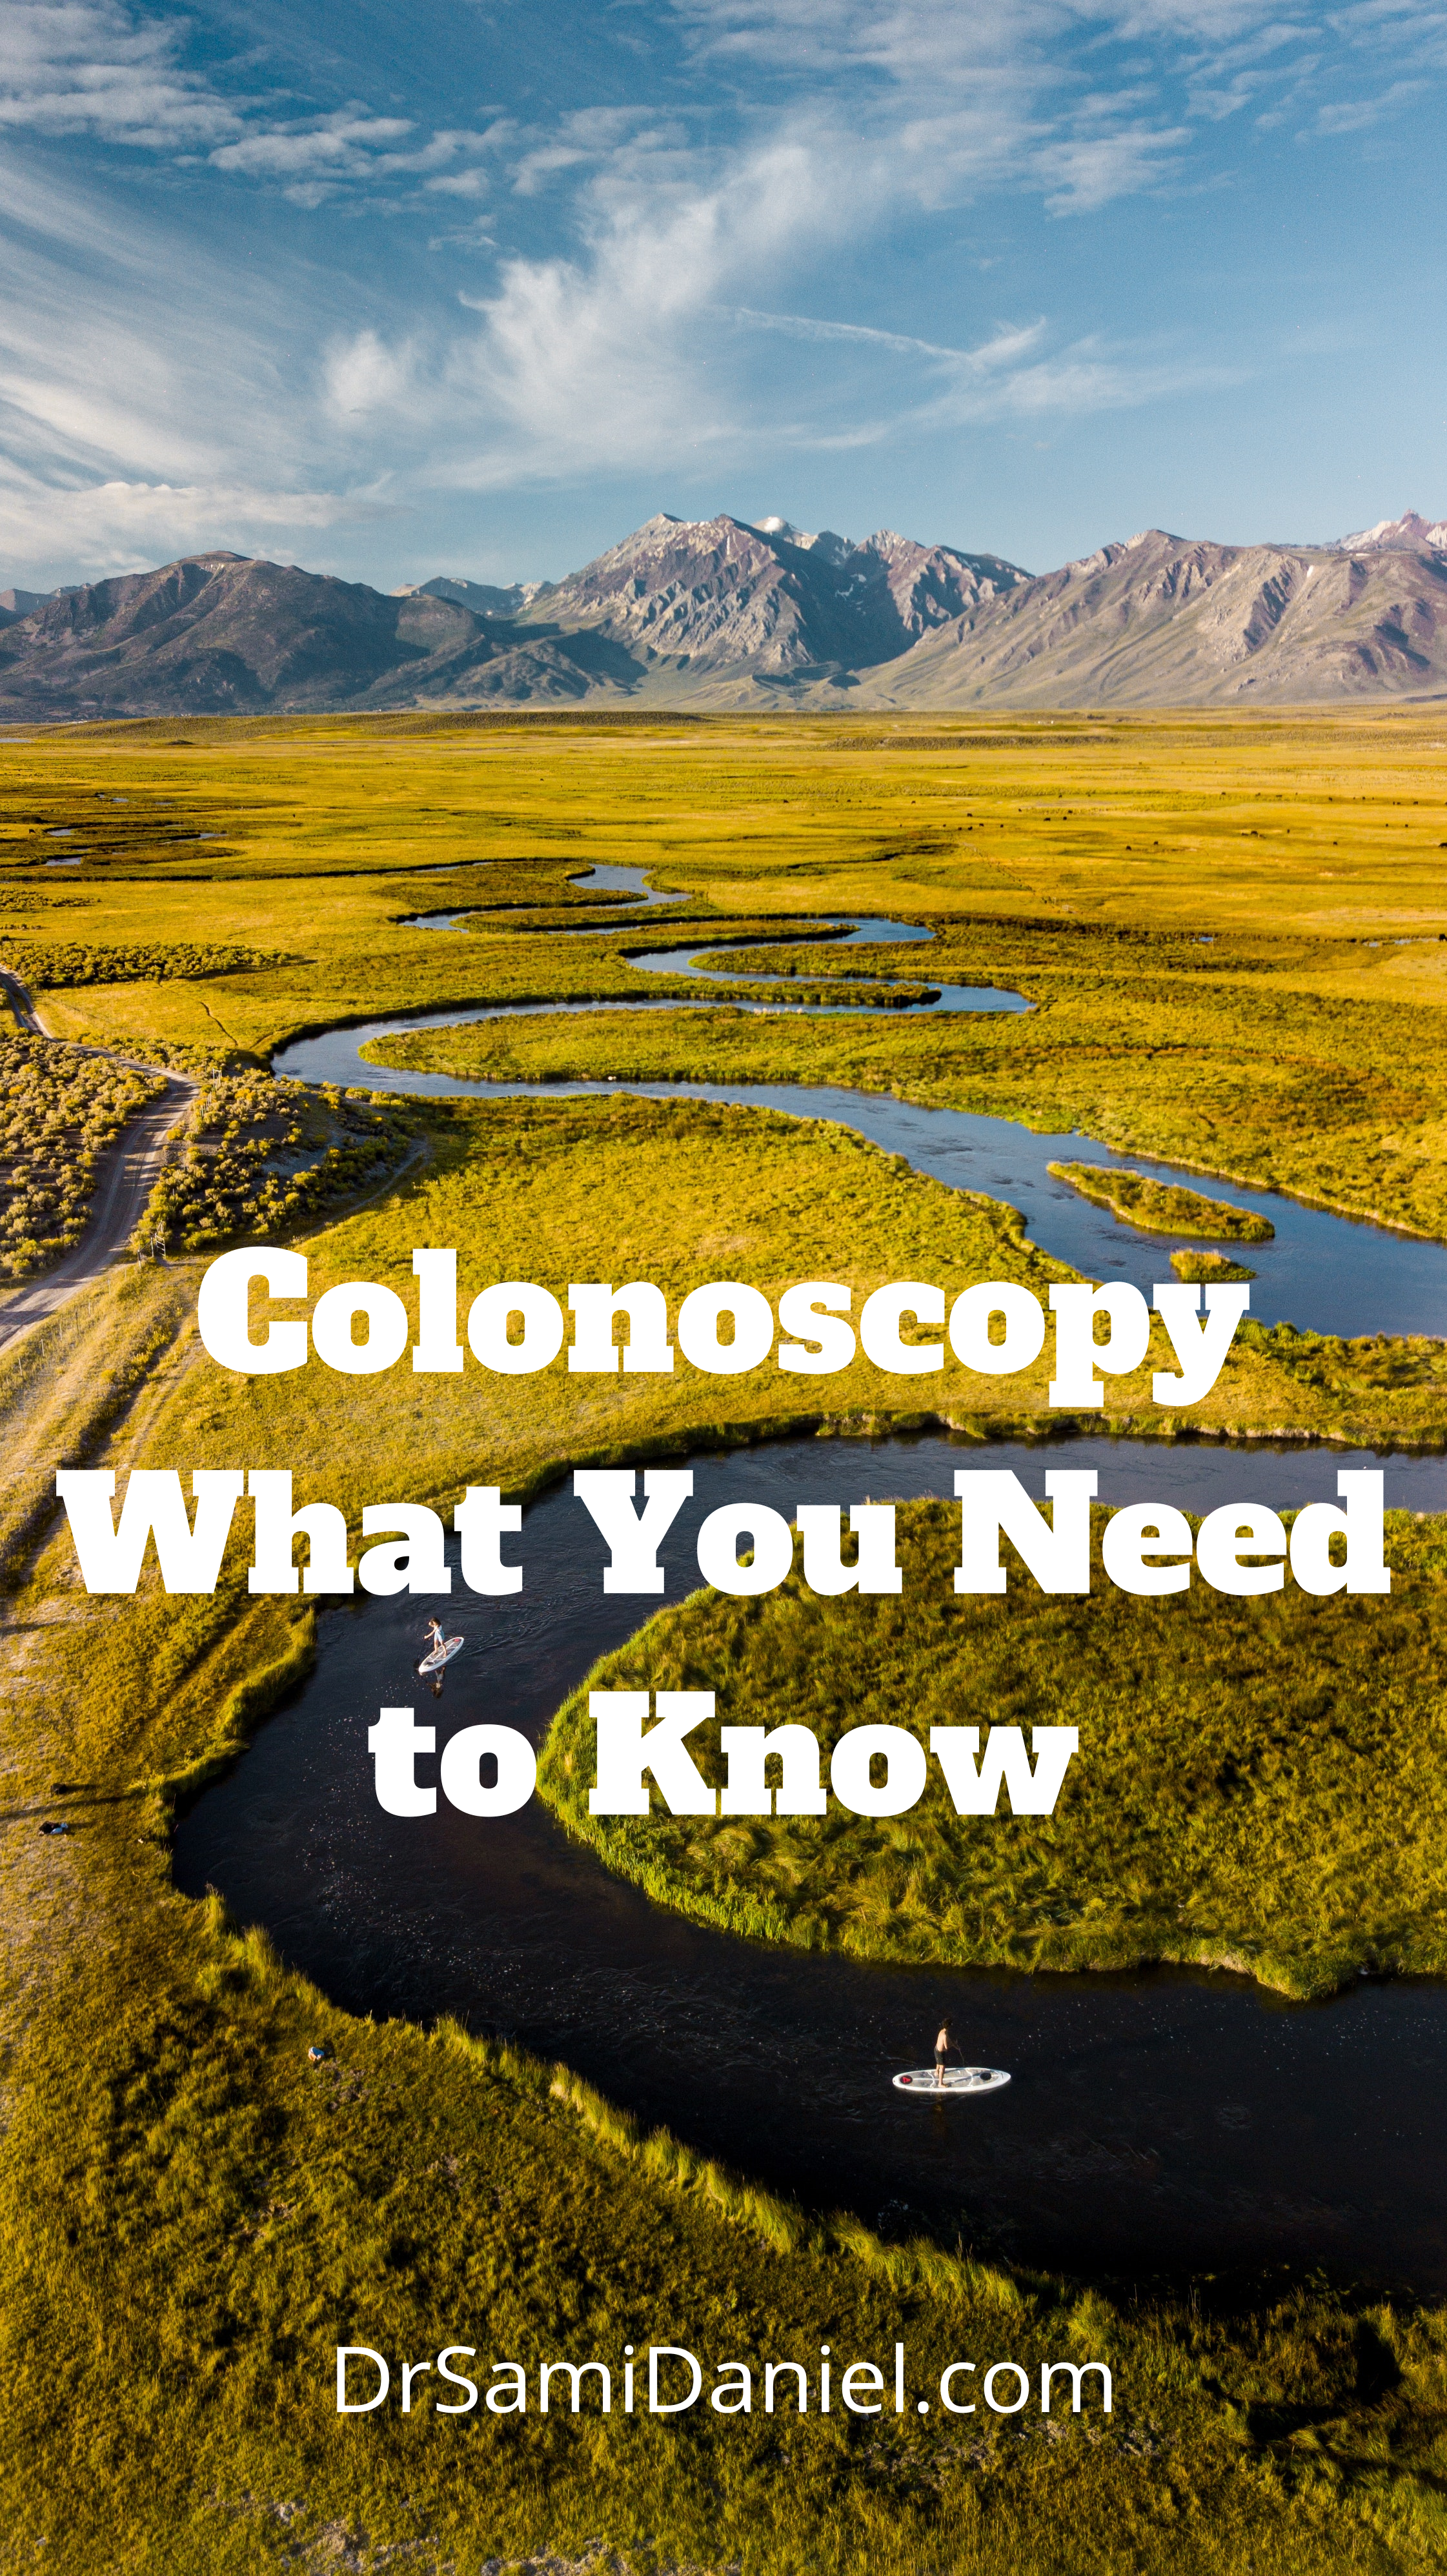 Colonoscopy, what you need to know